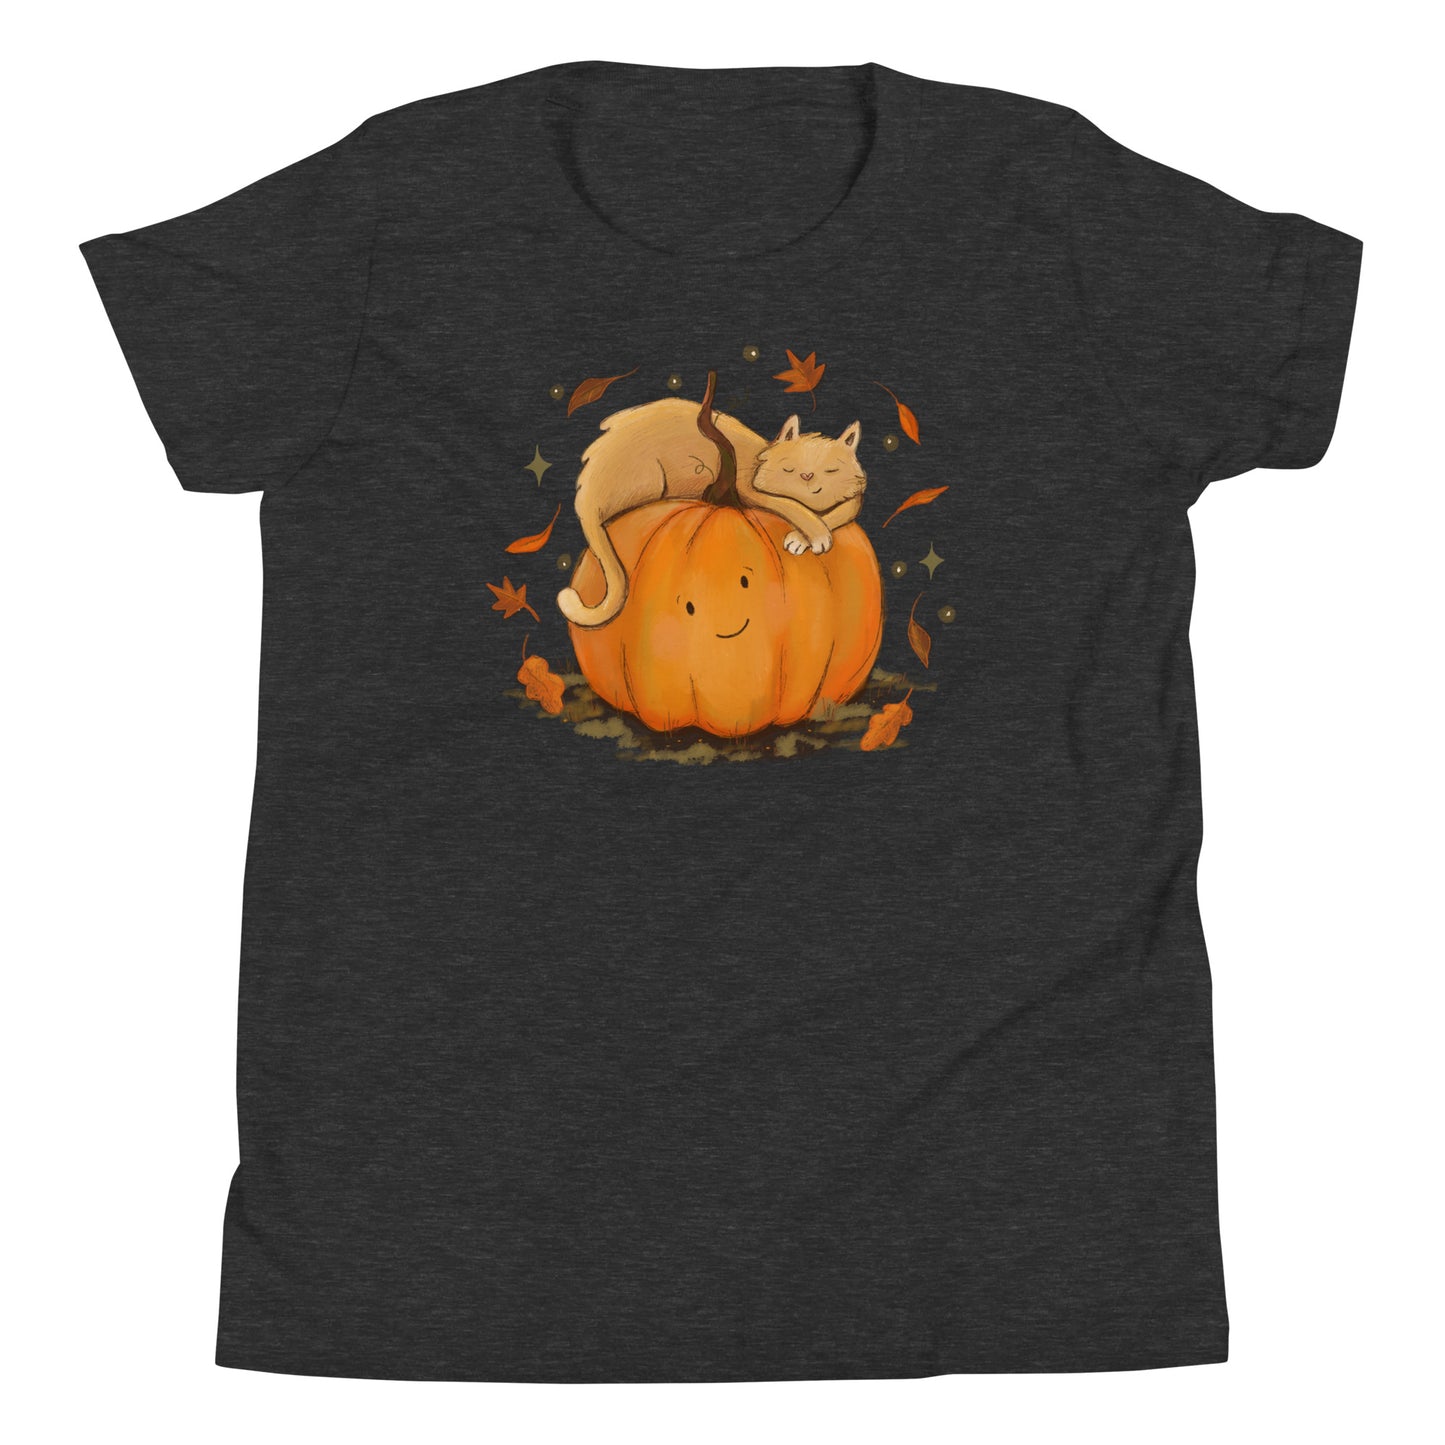 Youth Cat and Pumpkin Snuggle T-Shirt